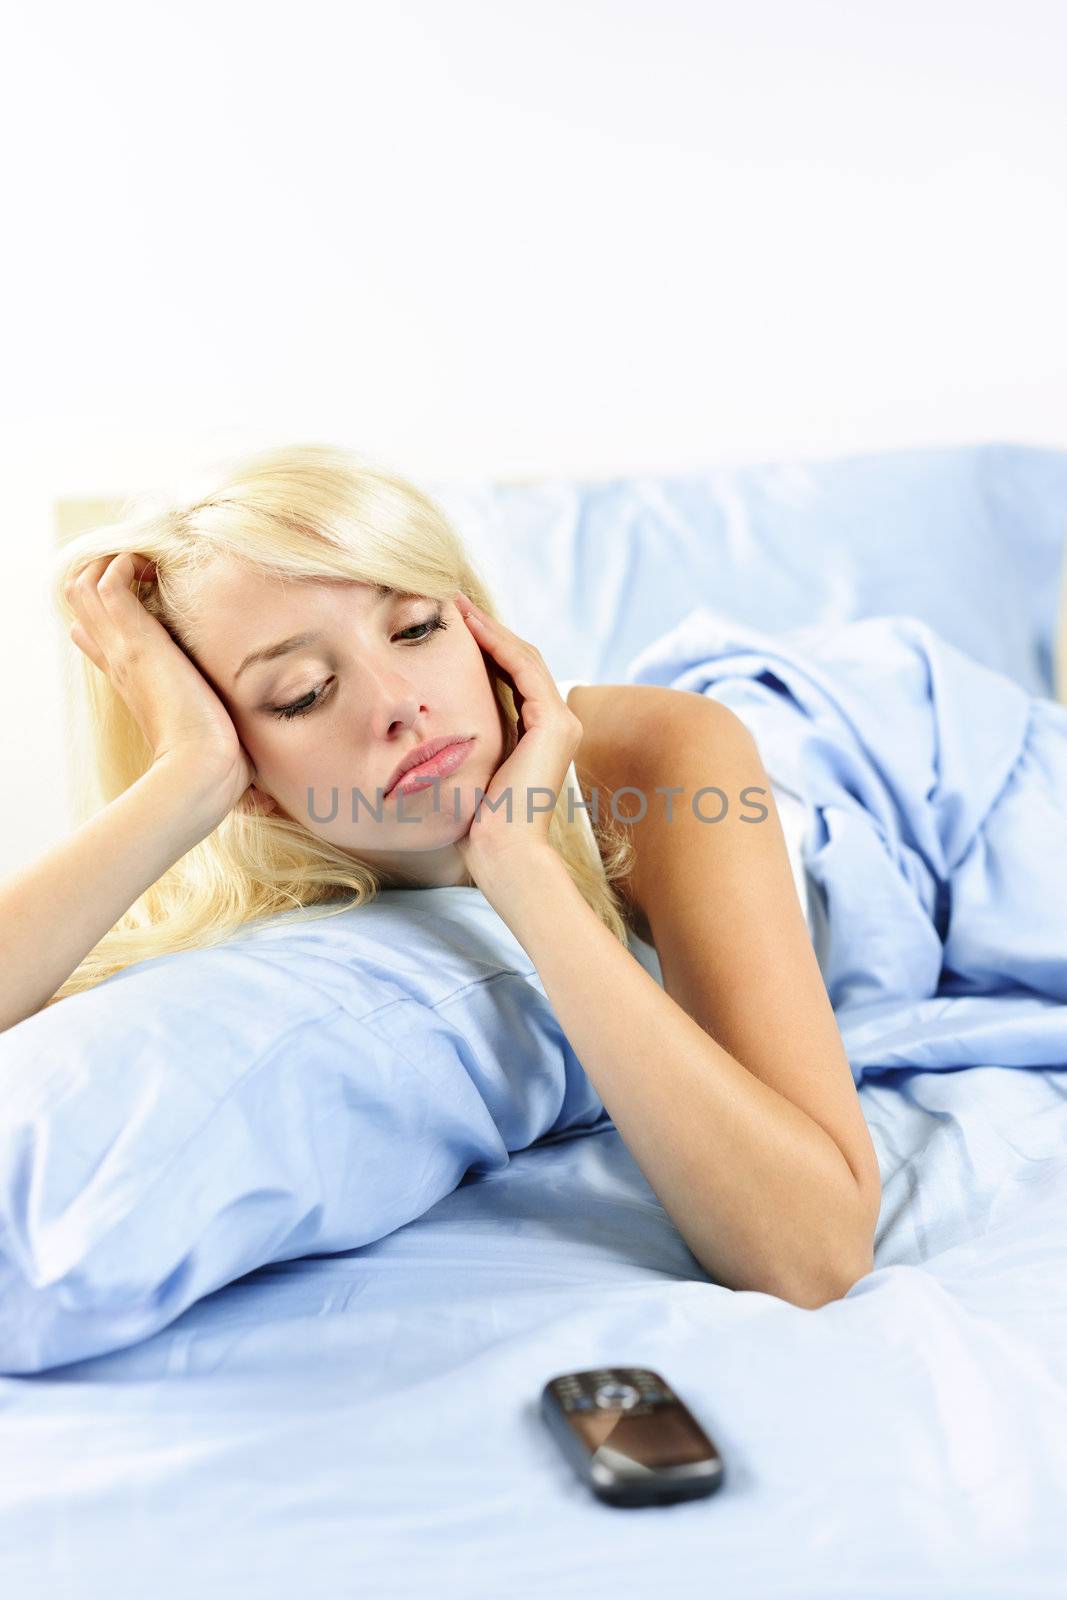 Sad woman waiting by phone in bed by elenathewise